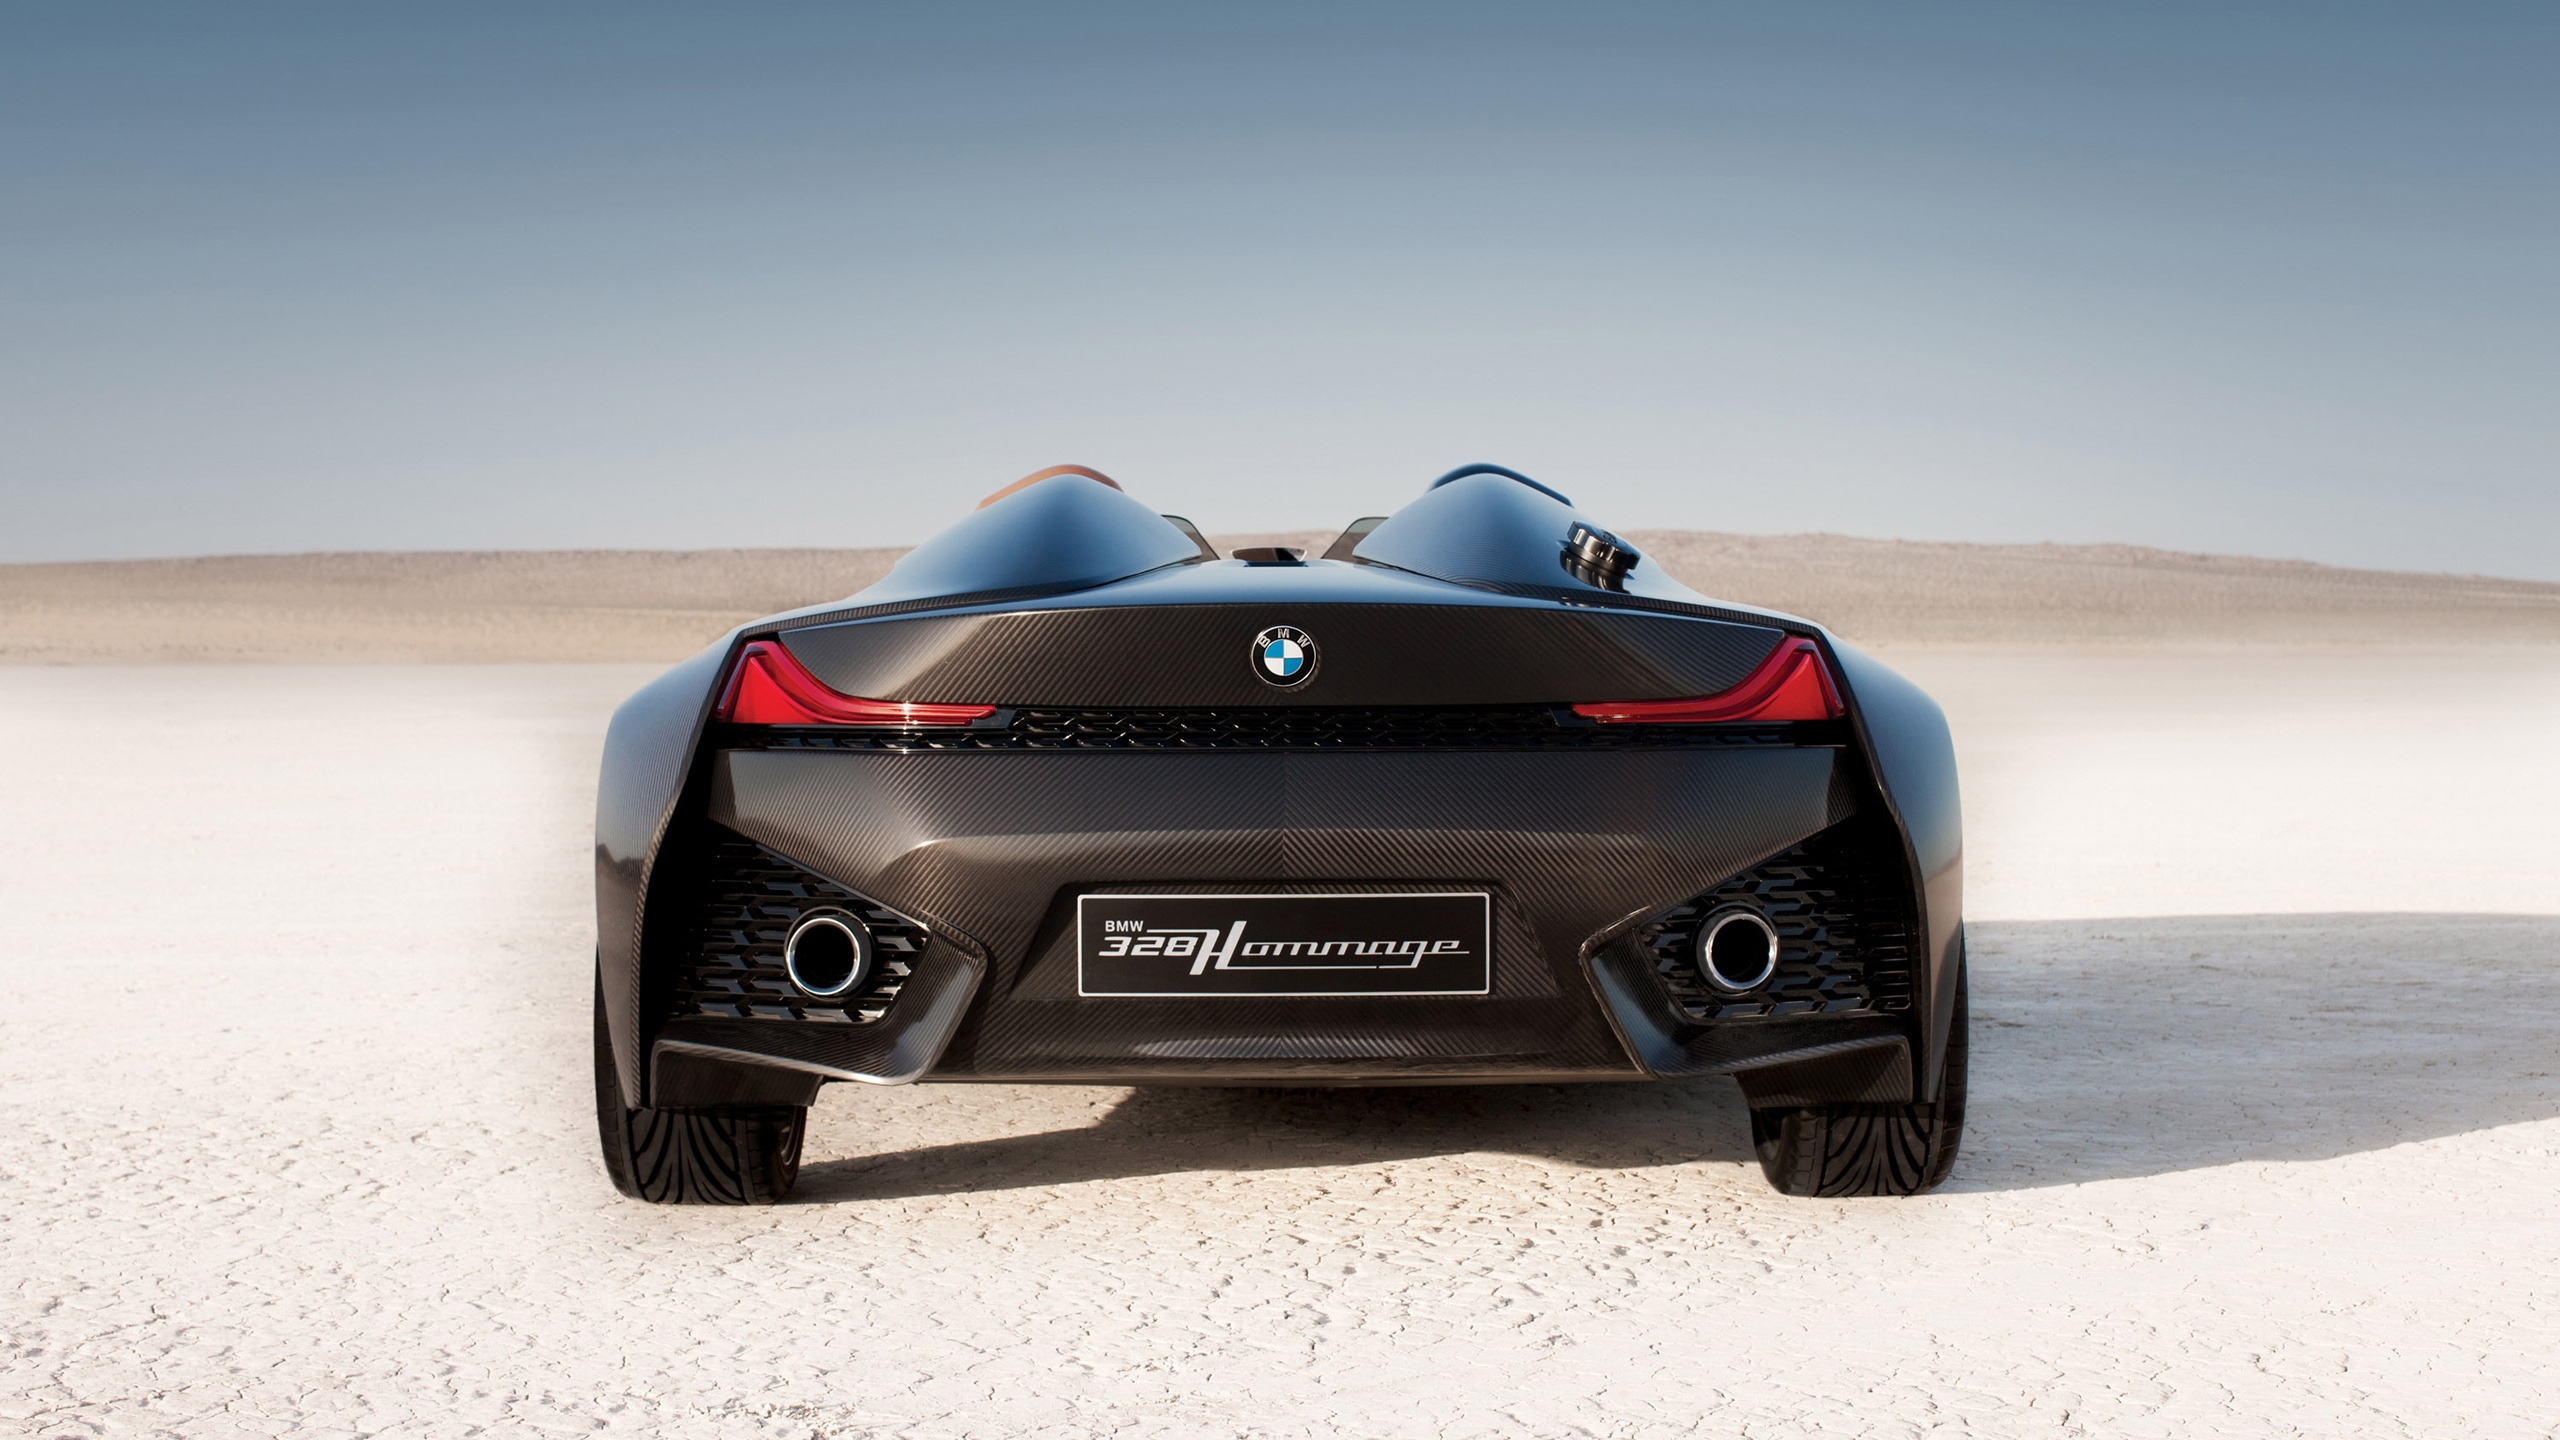 BMW 328 Hommage Rear for 2560x1440 HDTV resolution